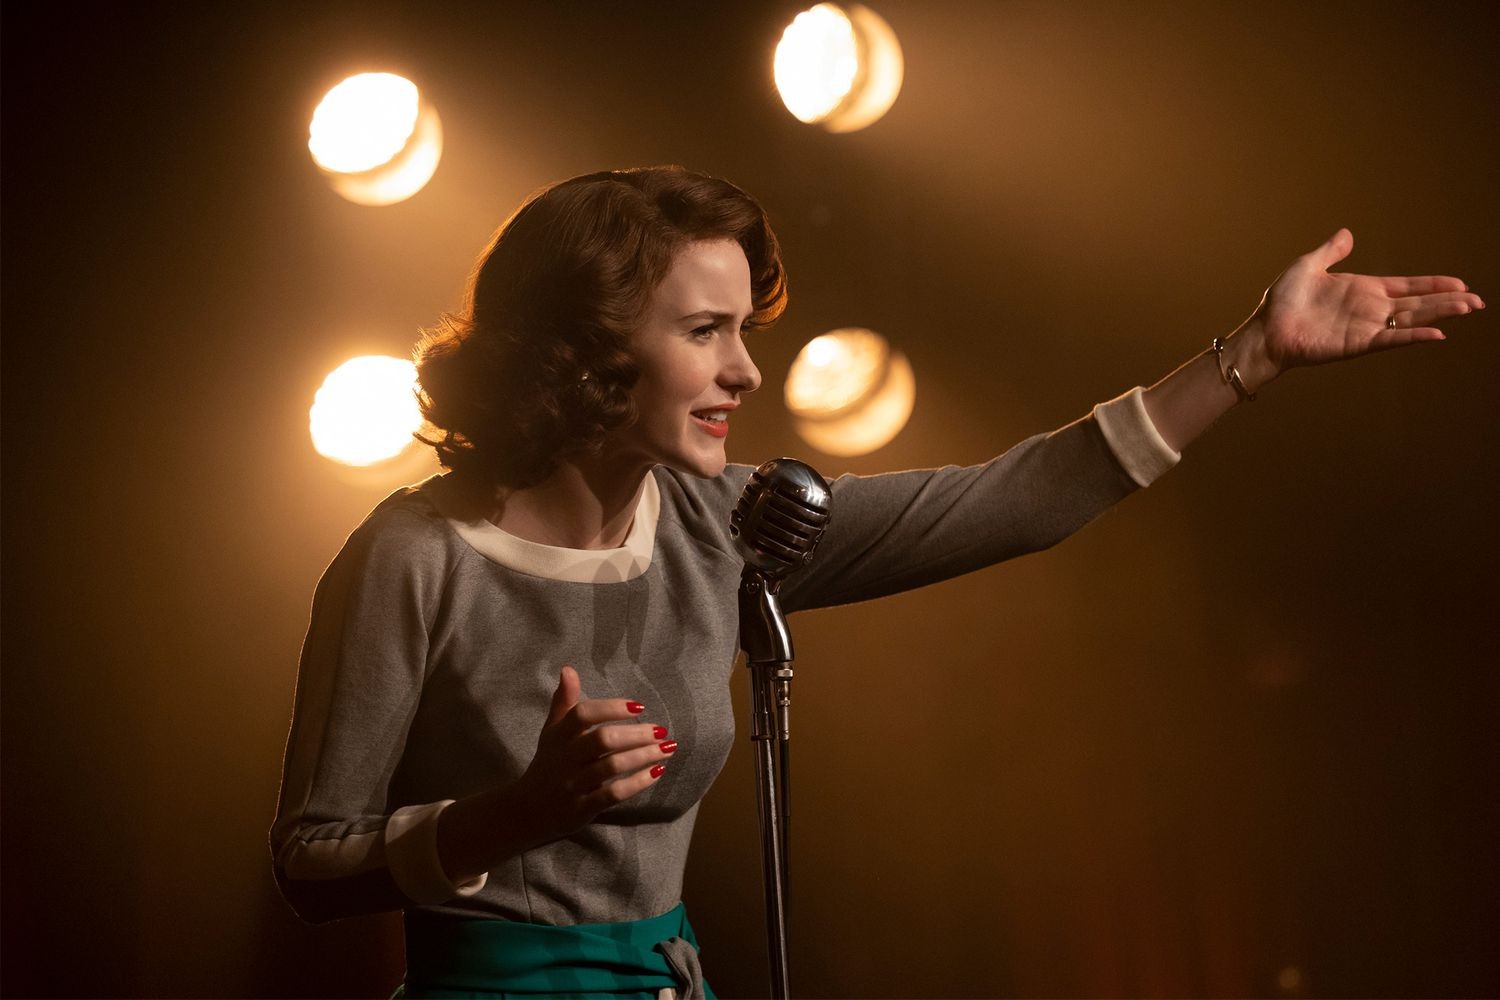 Rachel Brosnahan singing in a still from The Marvelous Mrs. Maisel 